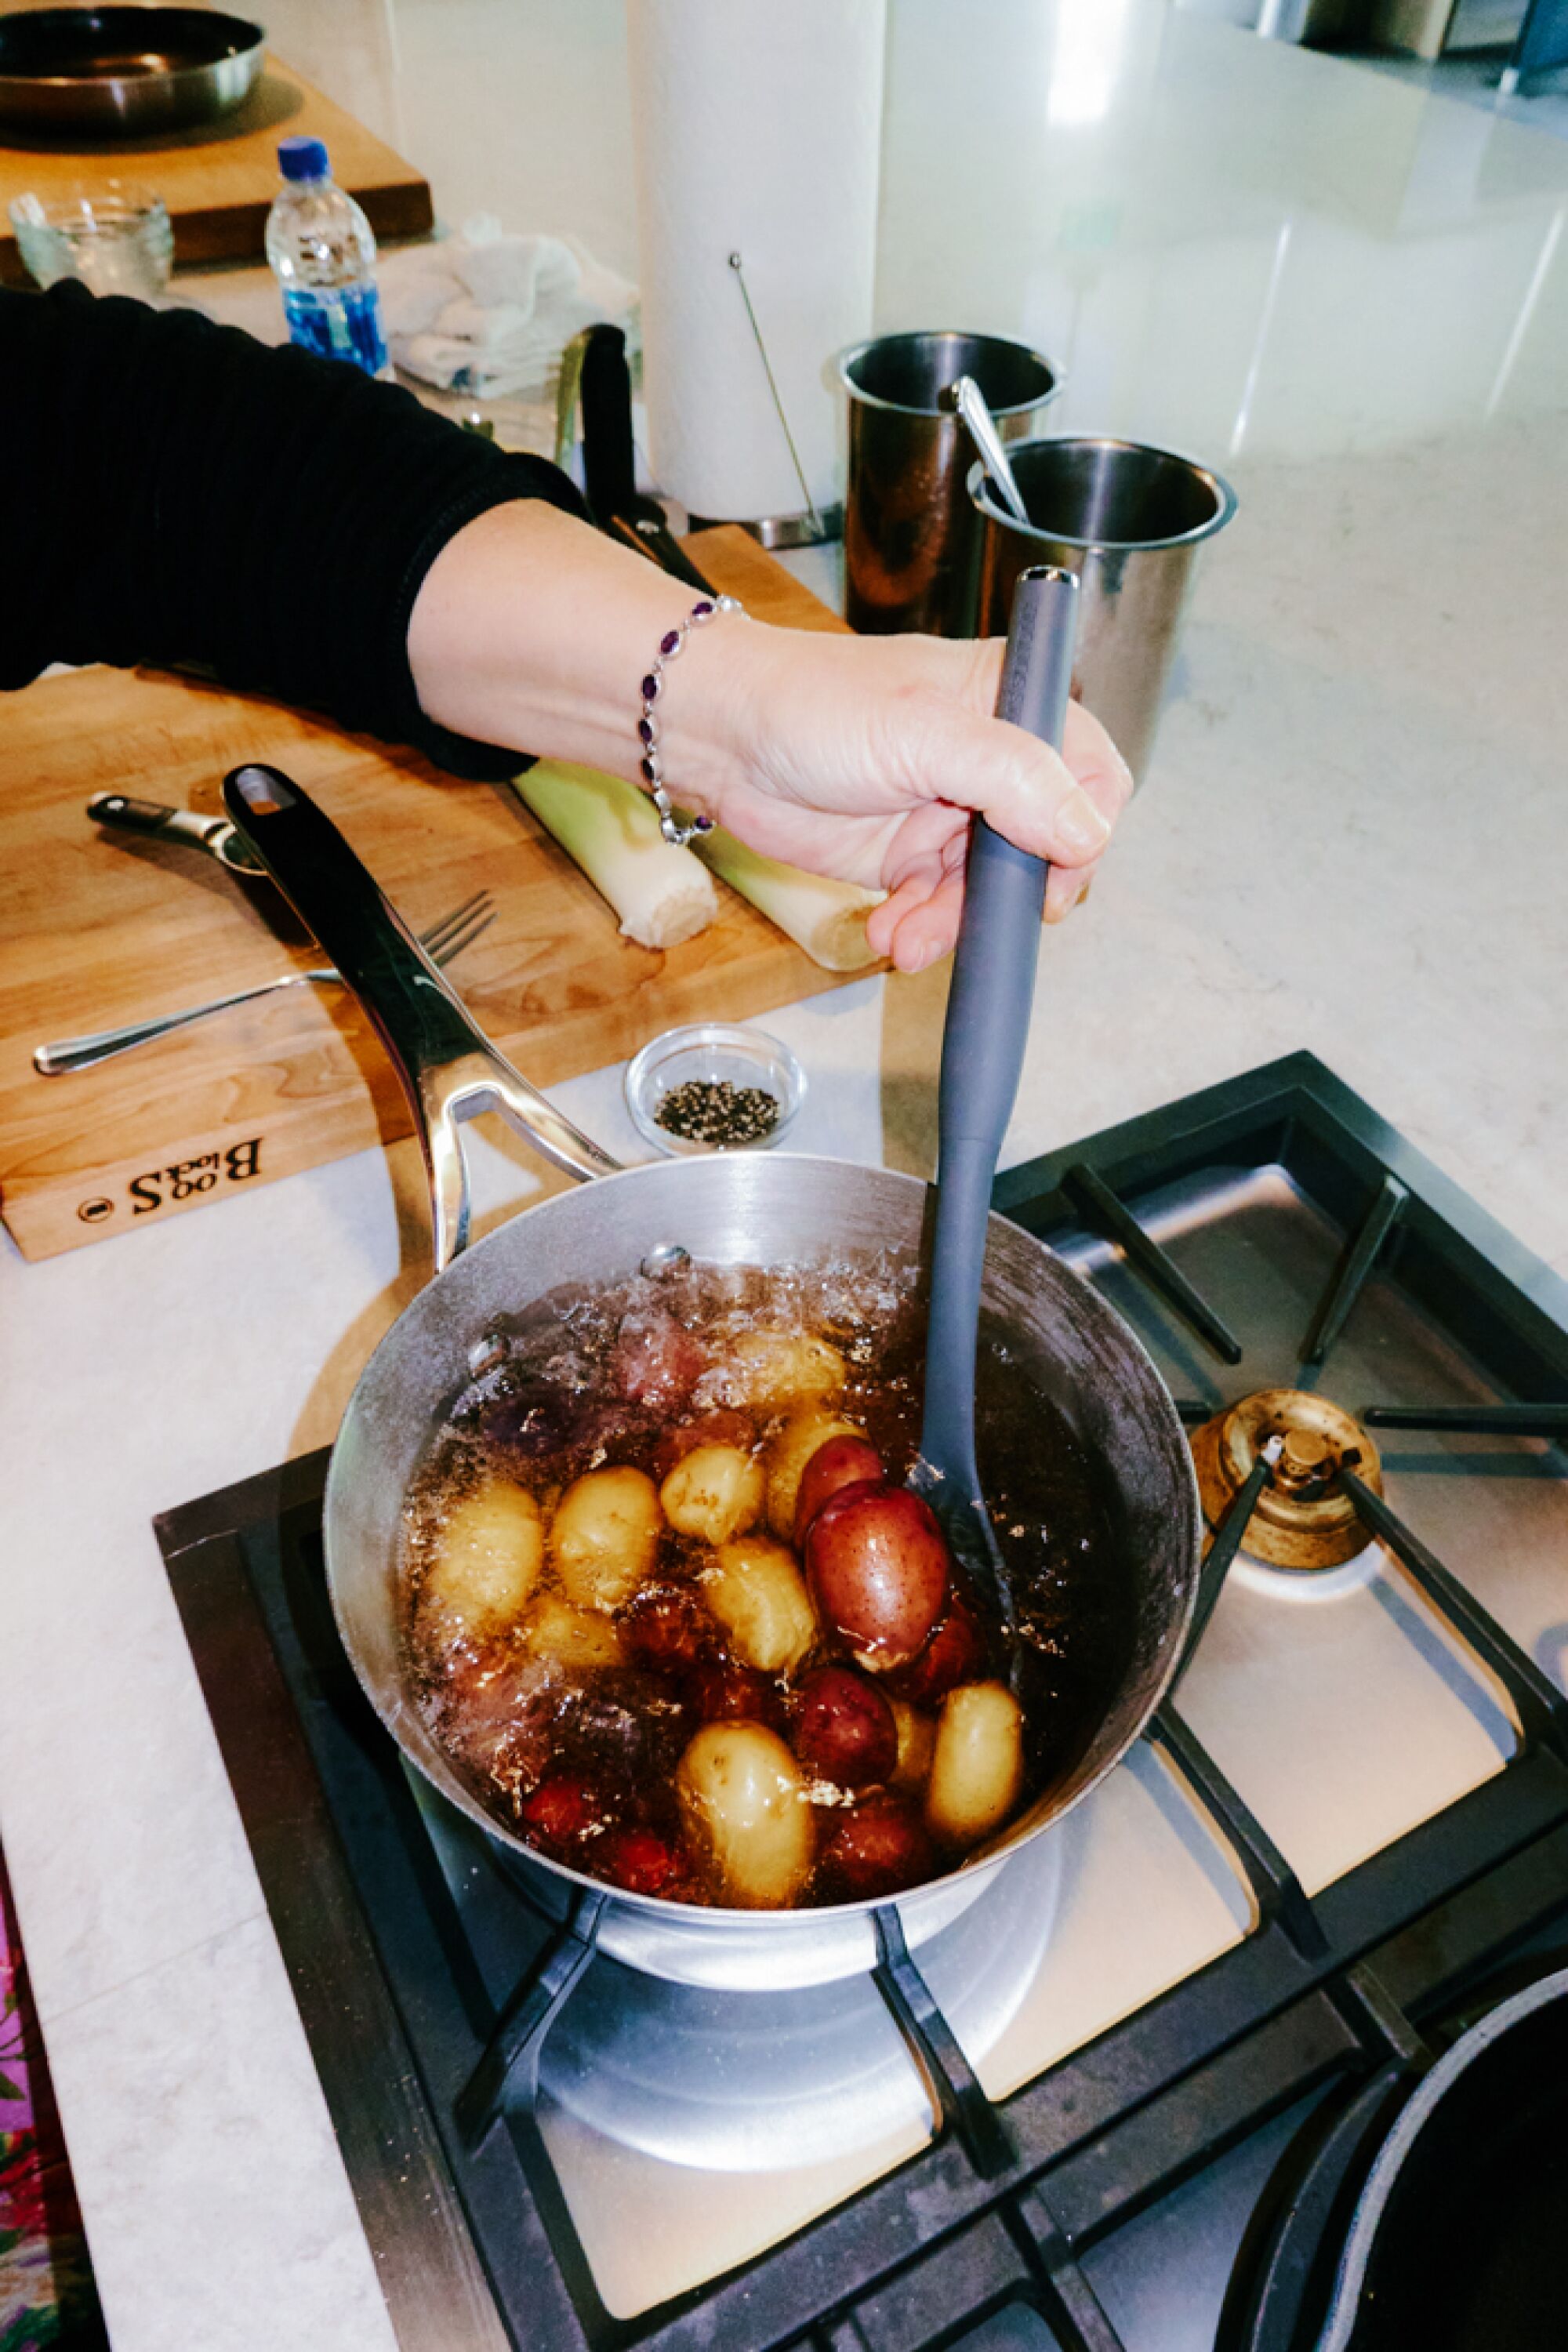 A hand stirs potatoes in a pot.